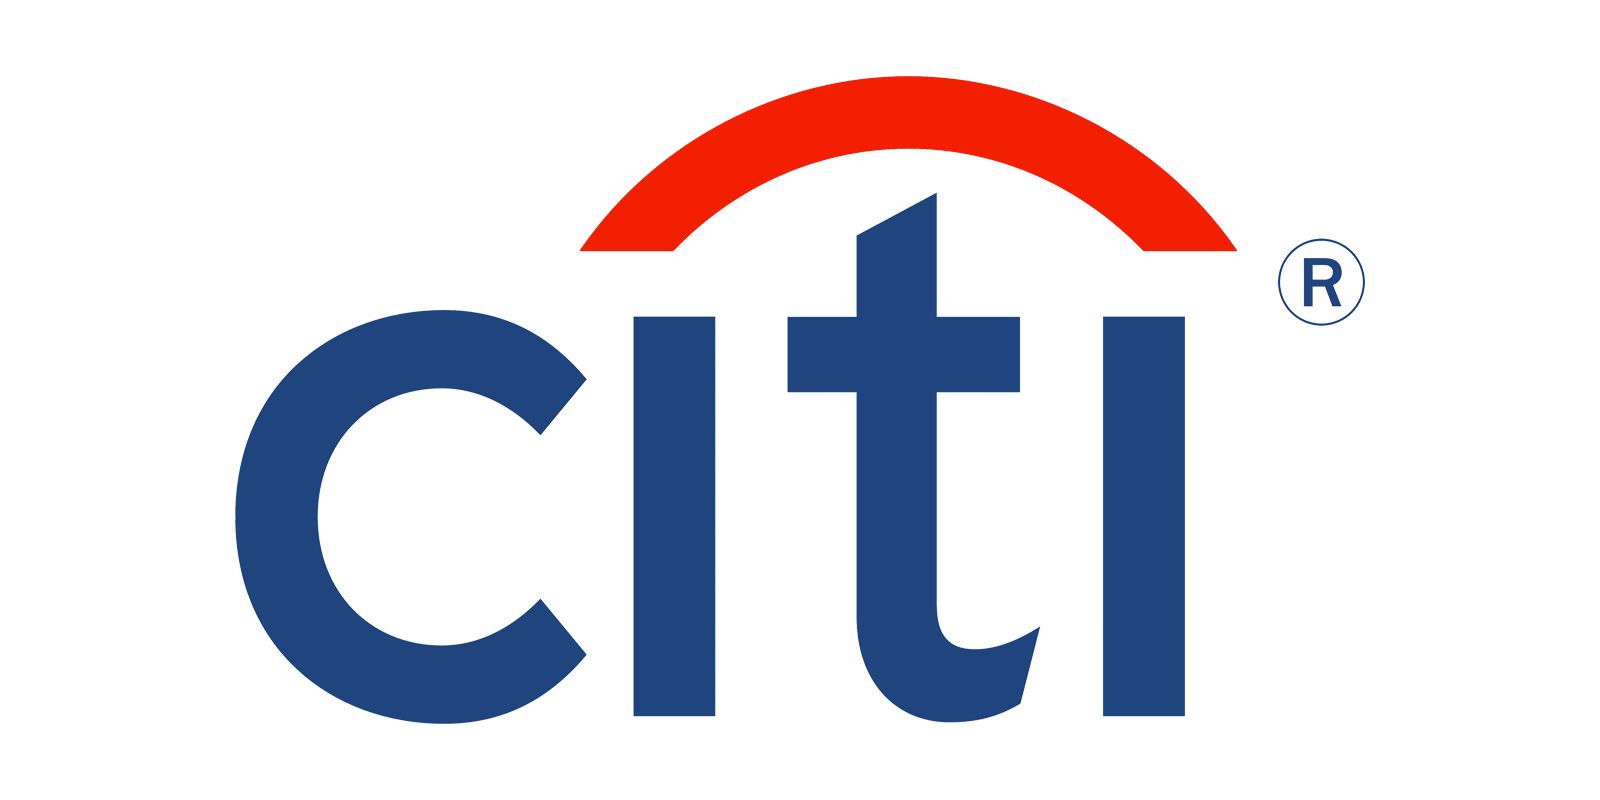 Citi Selects Mastercard as Network Partner for the Citi Plex Account by Google Pay